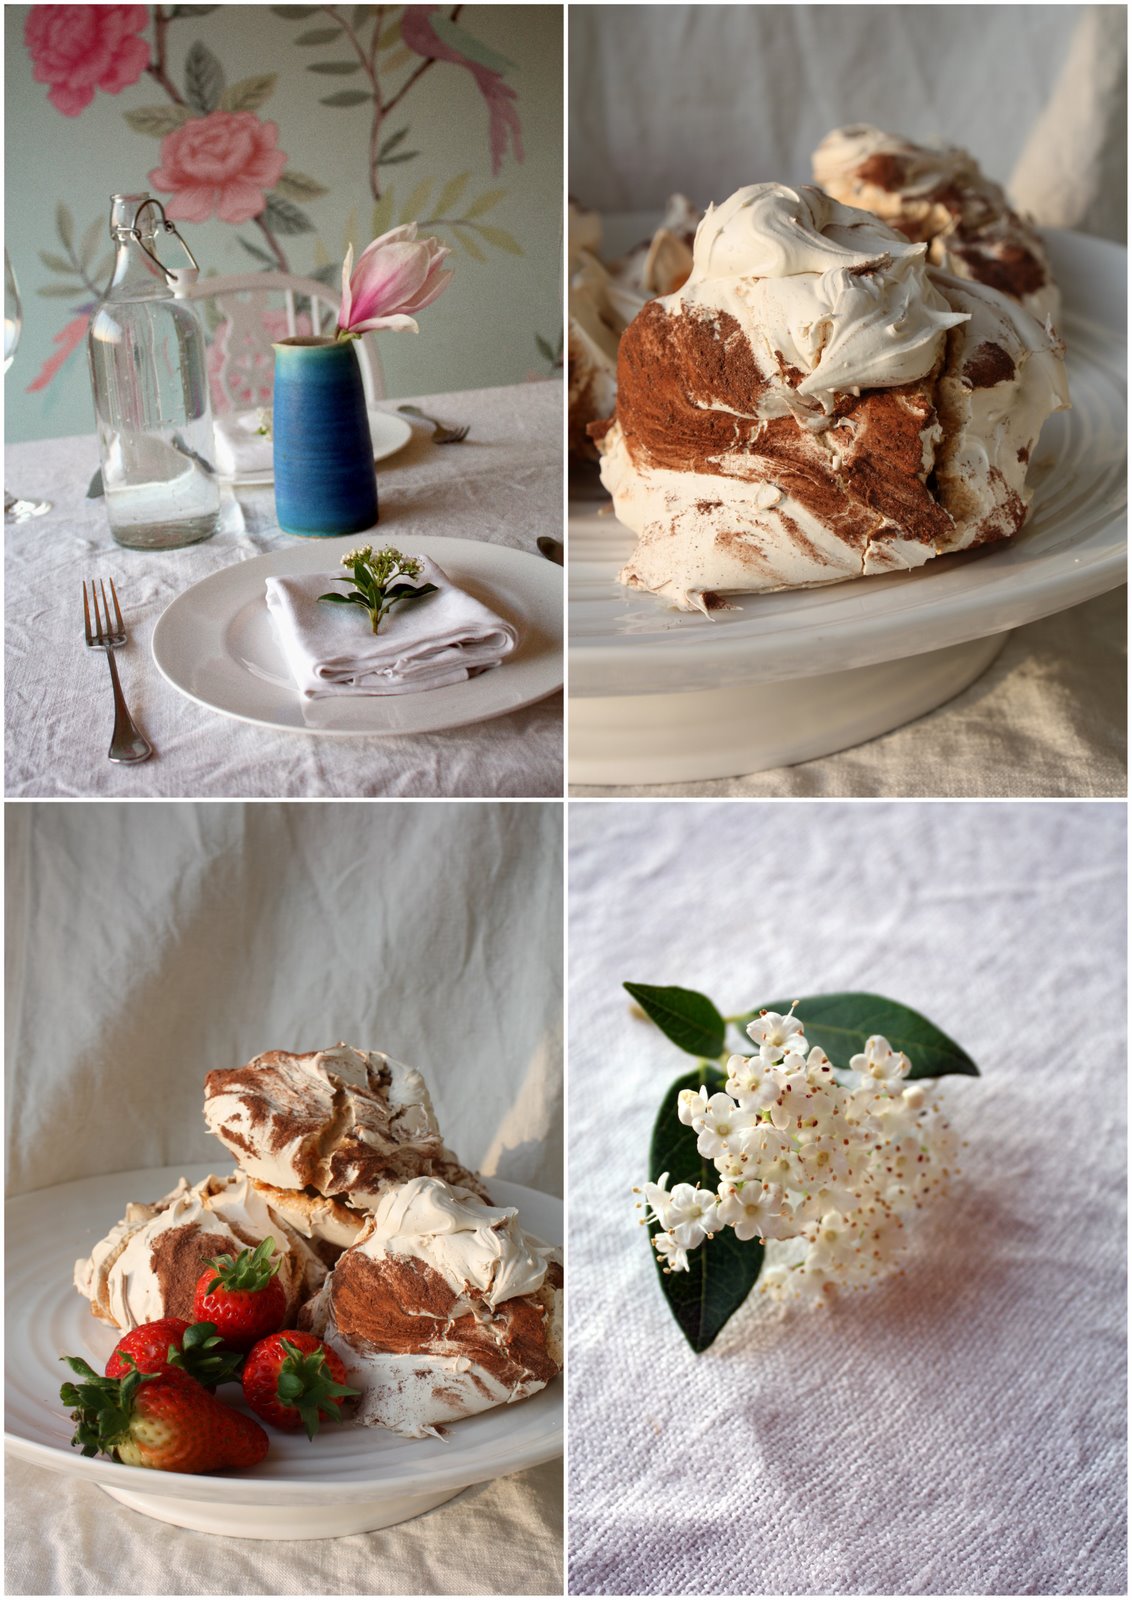 hardaker and pope: ottolenghi meringues